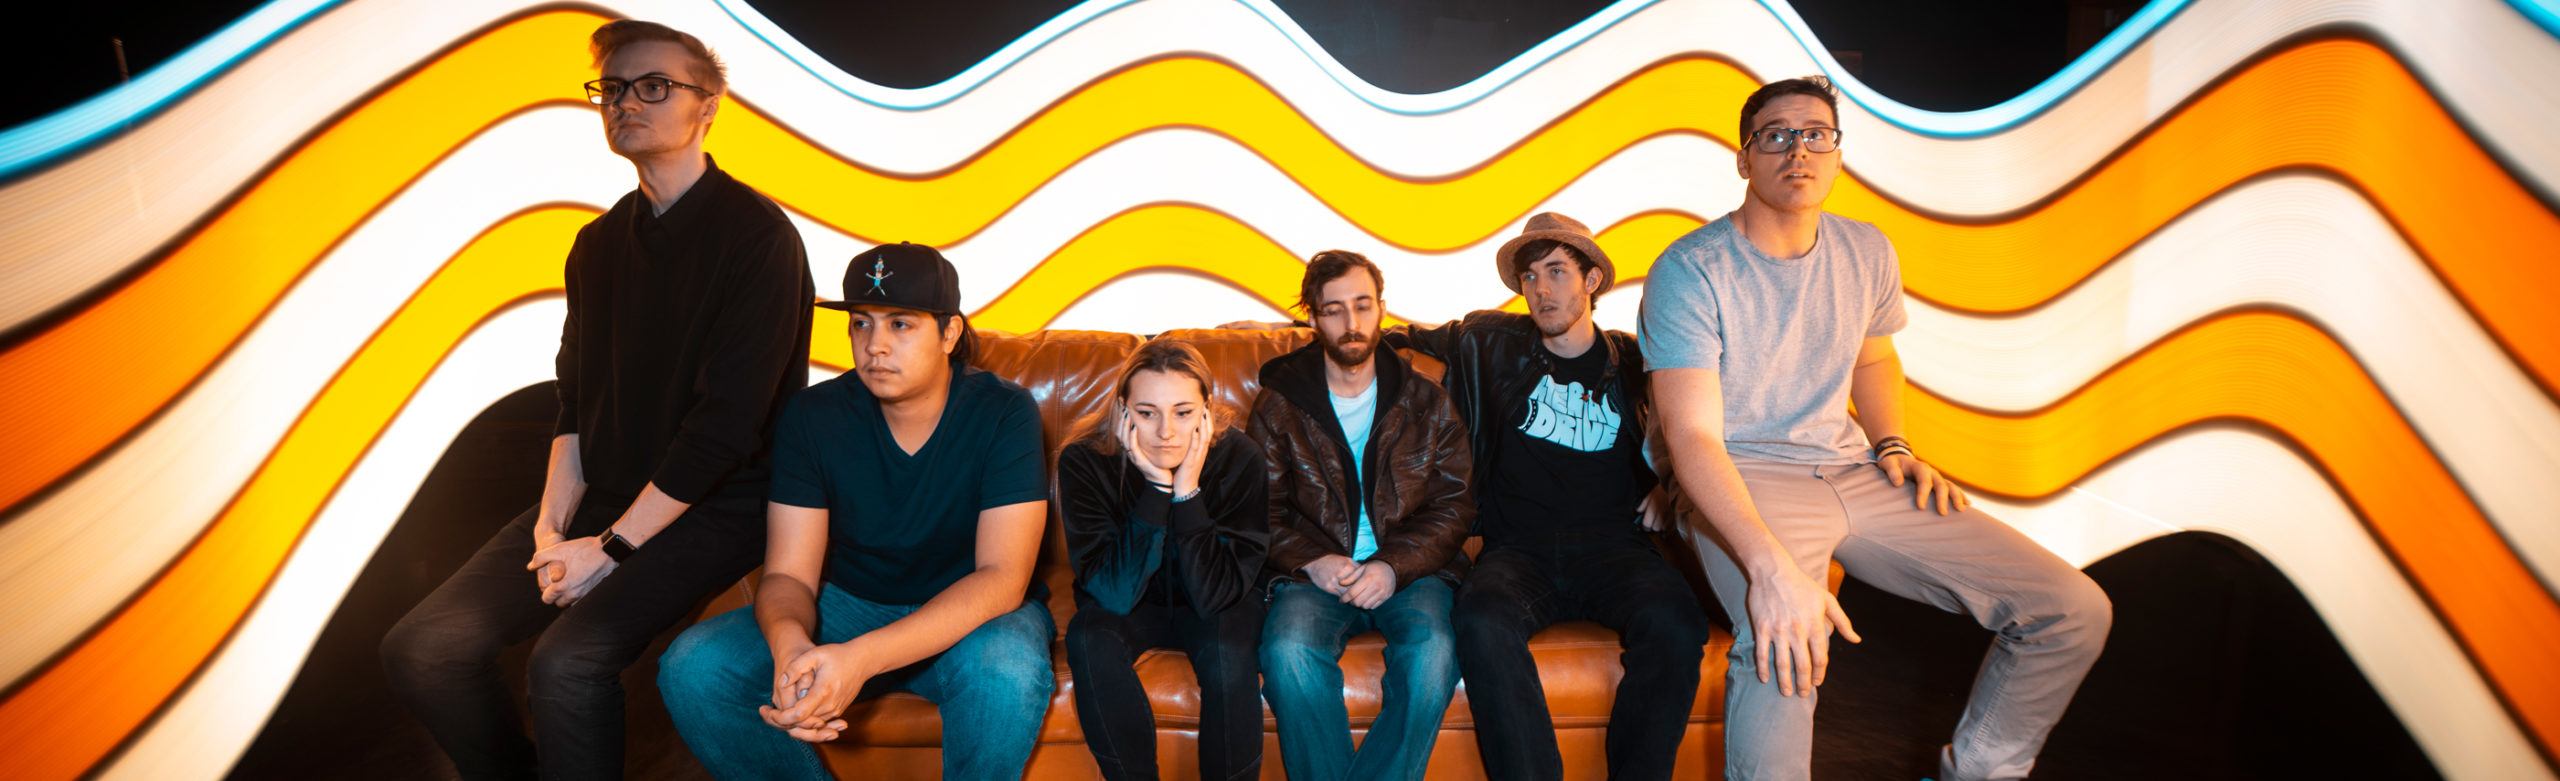 Q&A with Billings’ Groove Outfit Arterial Drive Image